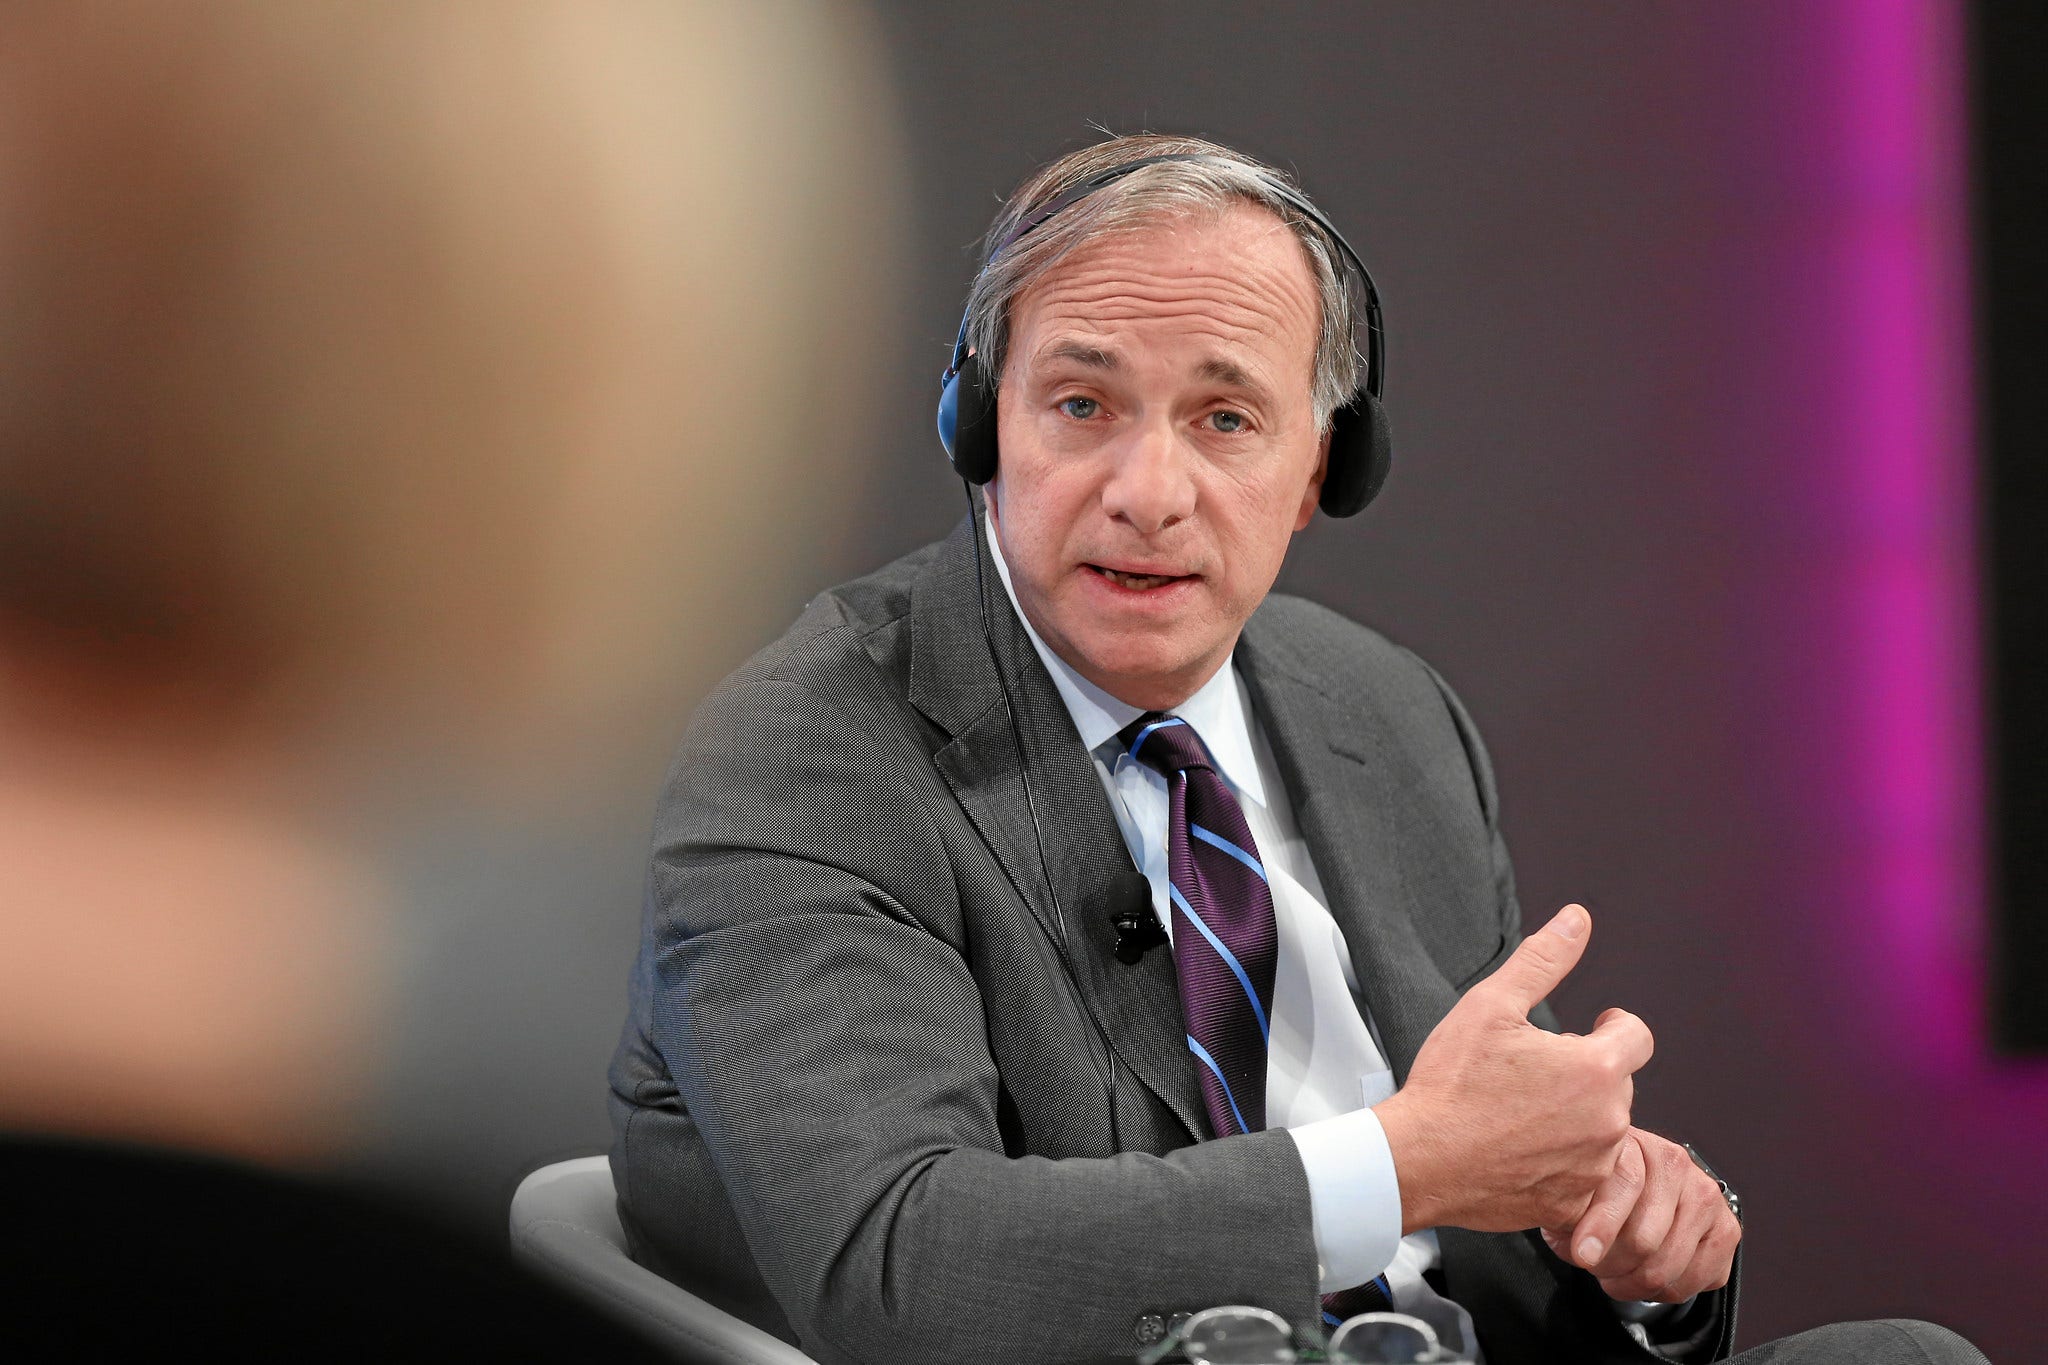 Ray Dalio No Longer Believes Cash Is Trash: 'When Facts Change, I Change My Mind'